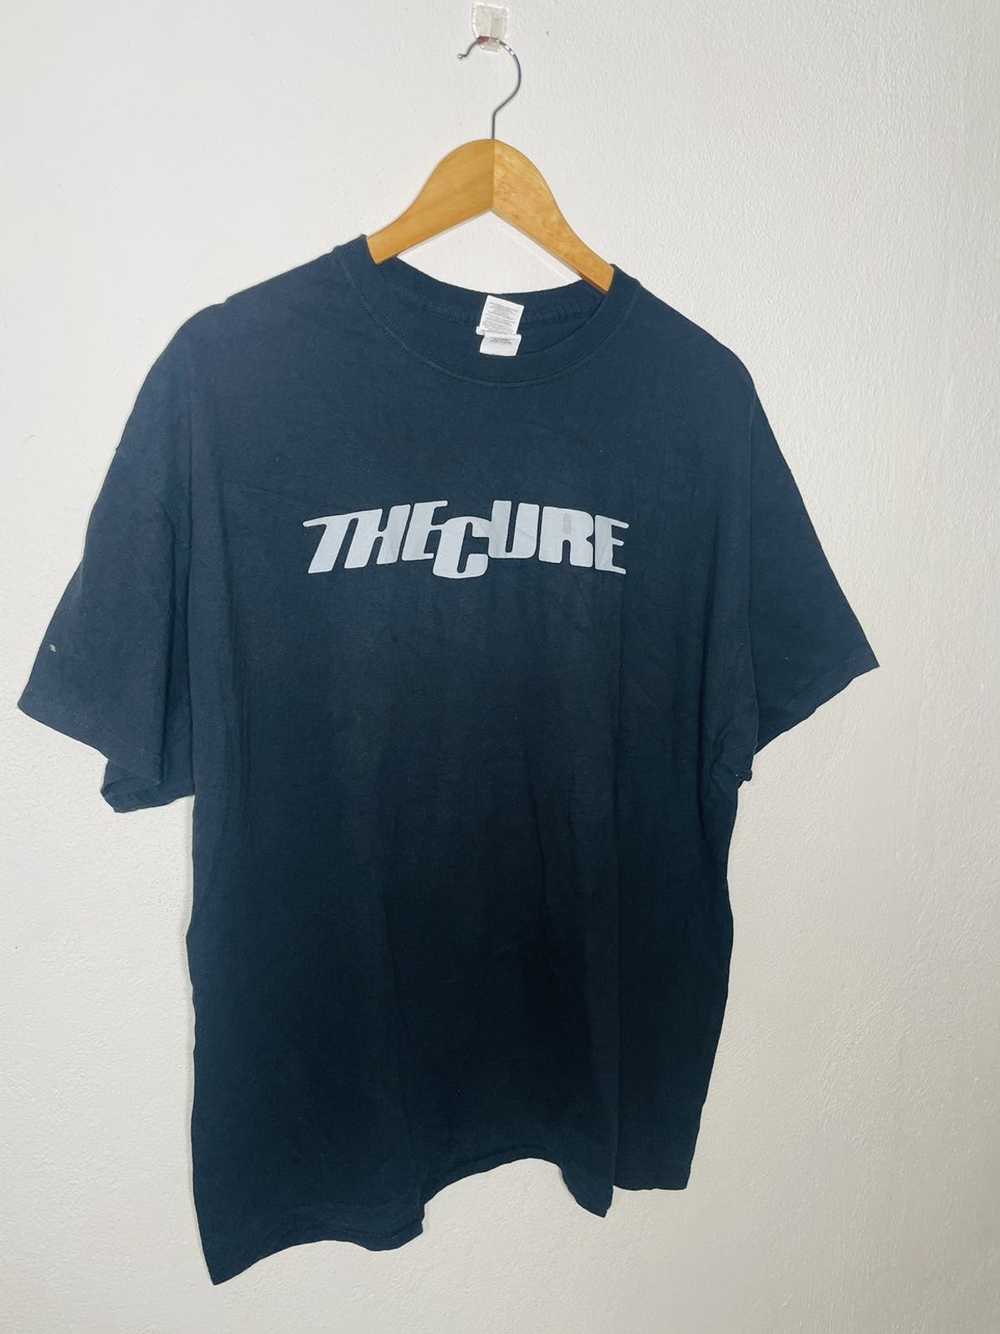 Band Tees × The Cure Rare!! The Cure Band T-Shirt… - image 2